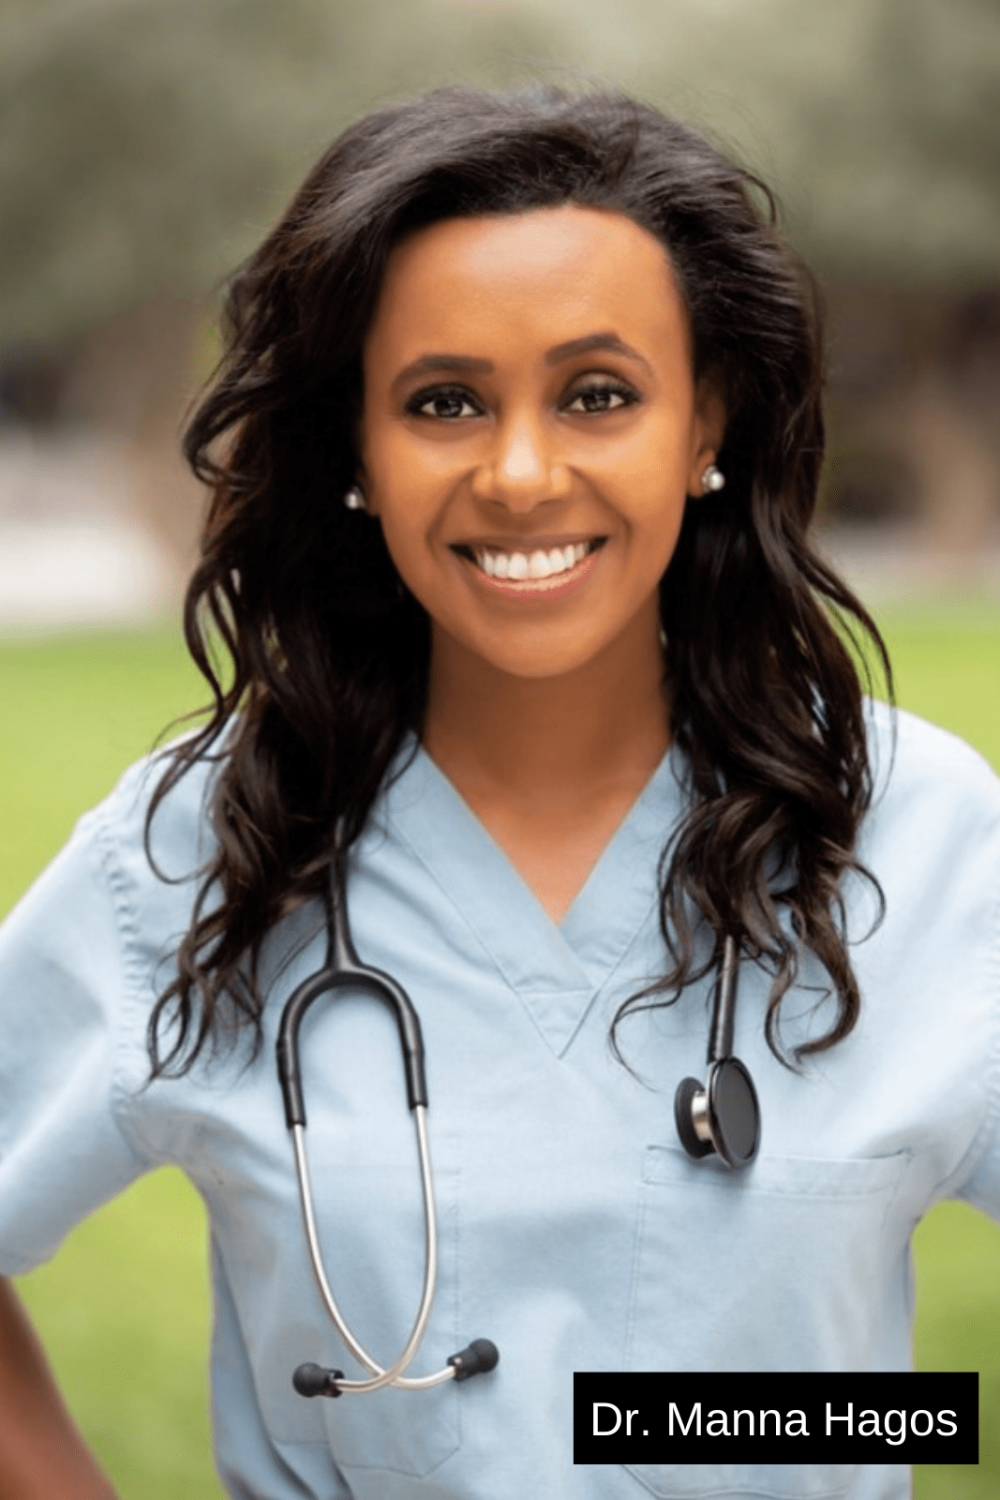 Smiling Eritrean-American female doctor wearing a stethoscope and scrubs; the doctor is standing outside.